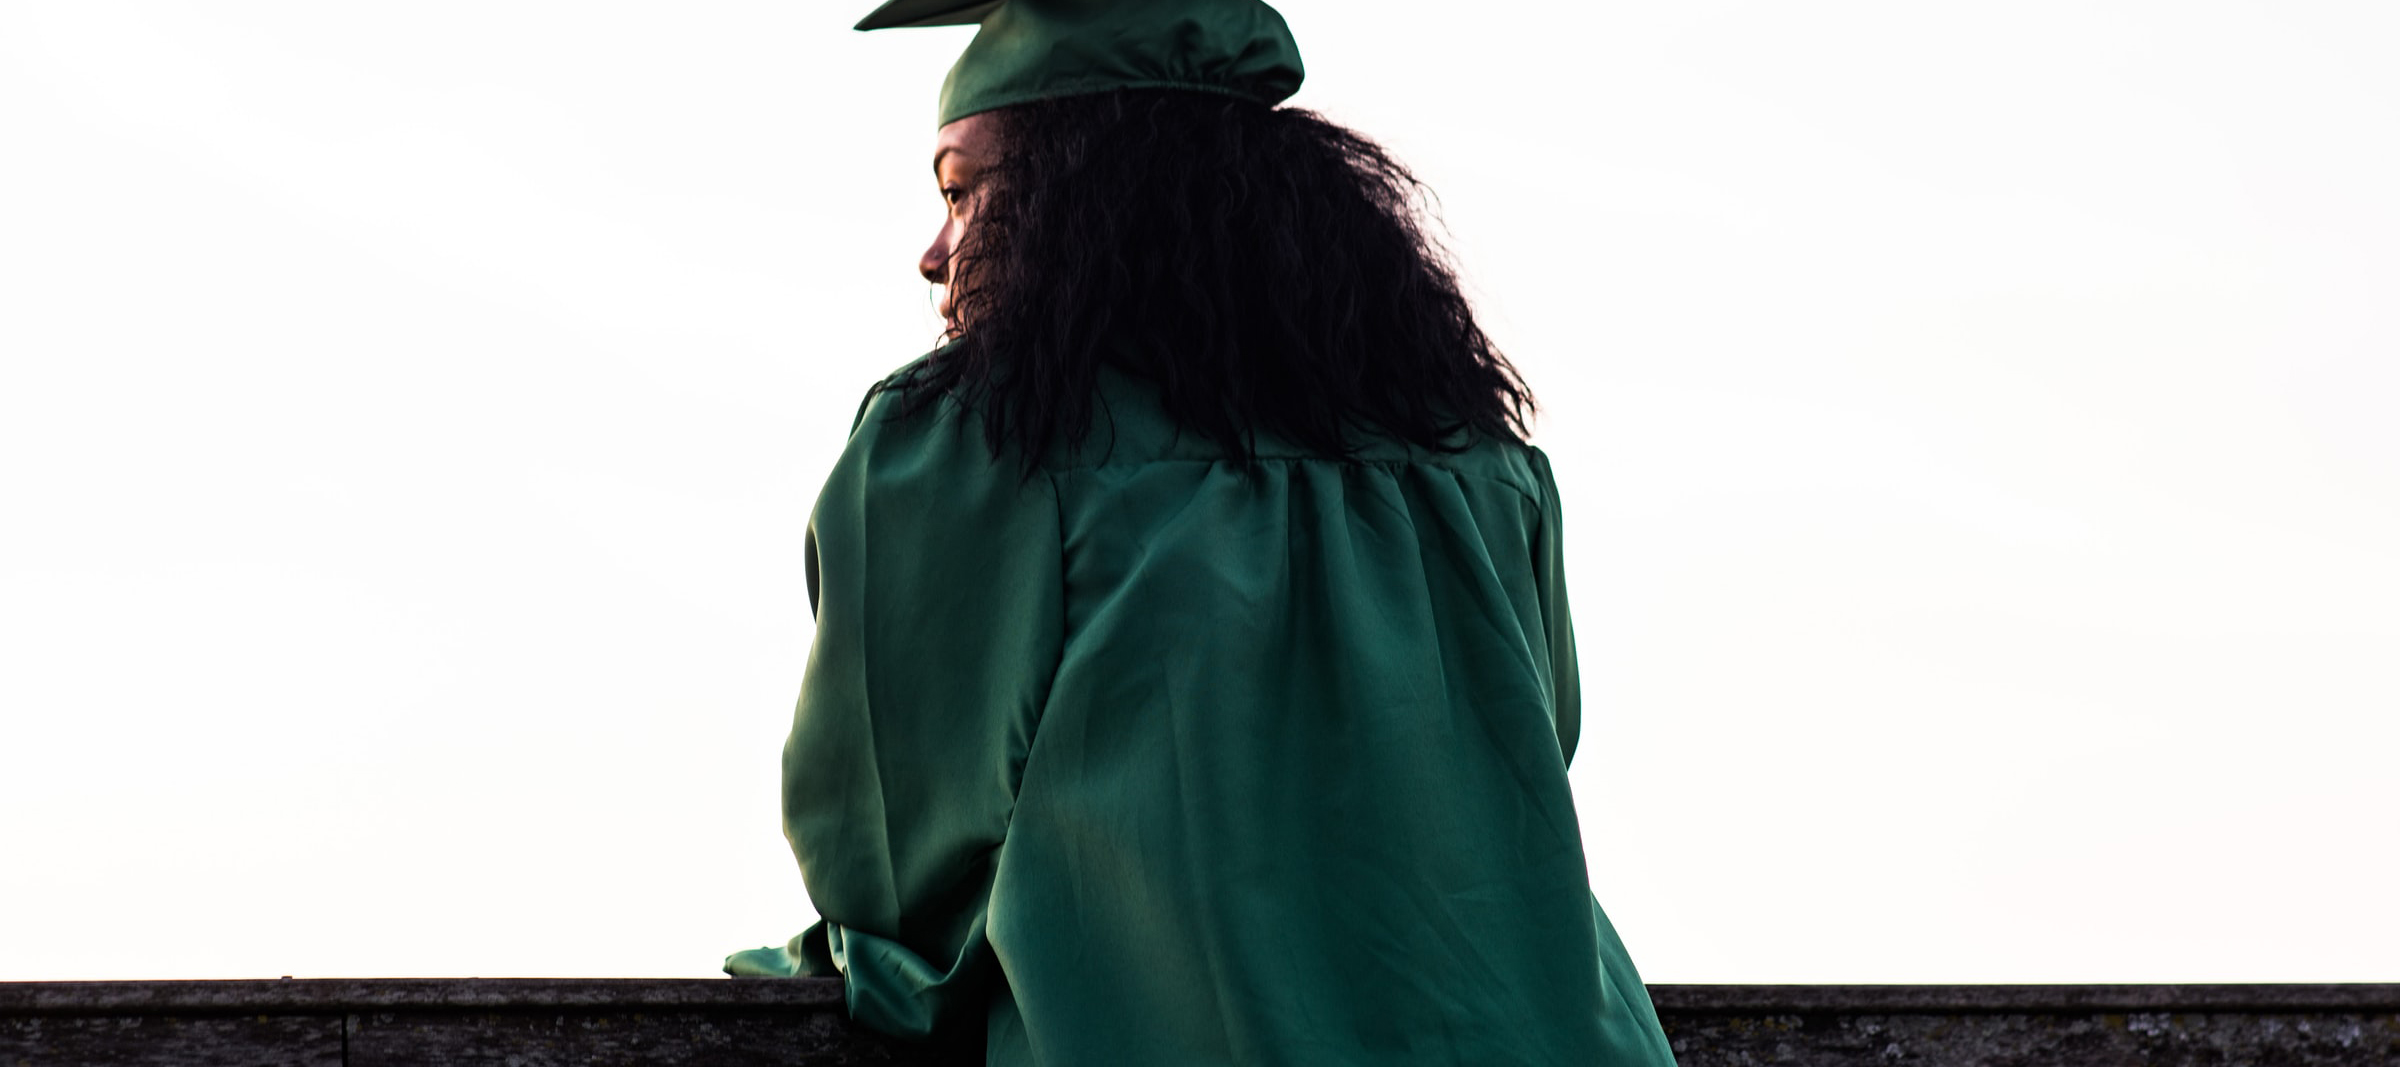 Stock photo of student in robe and graduation cap looking at a college